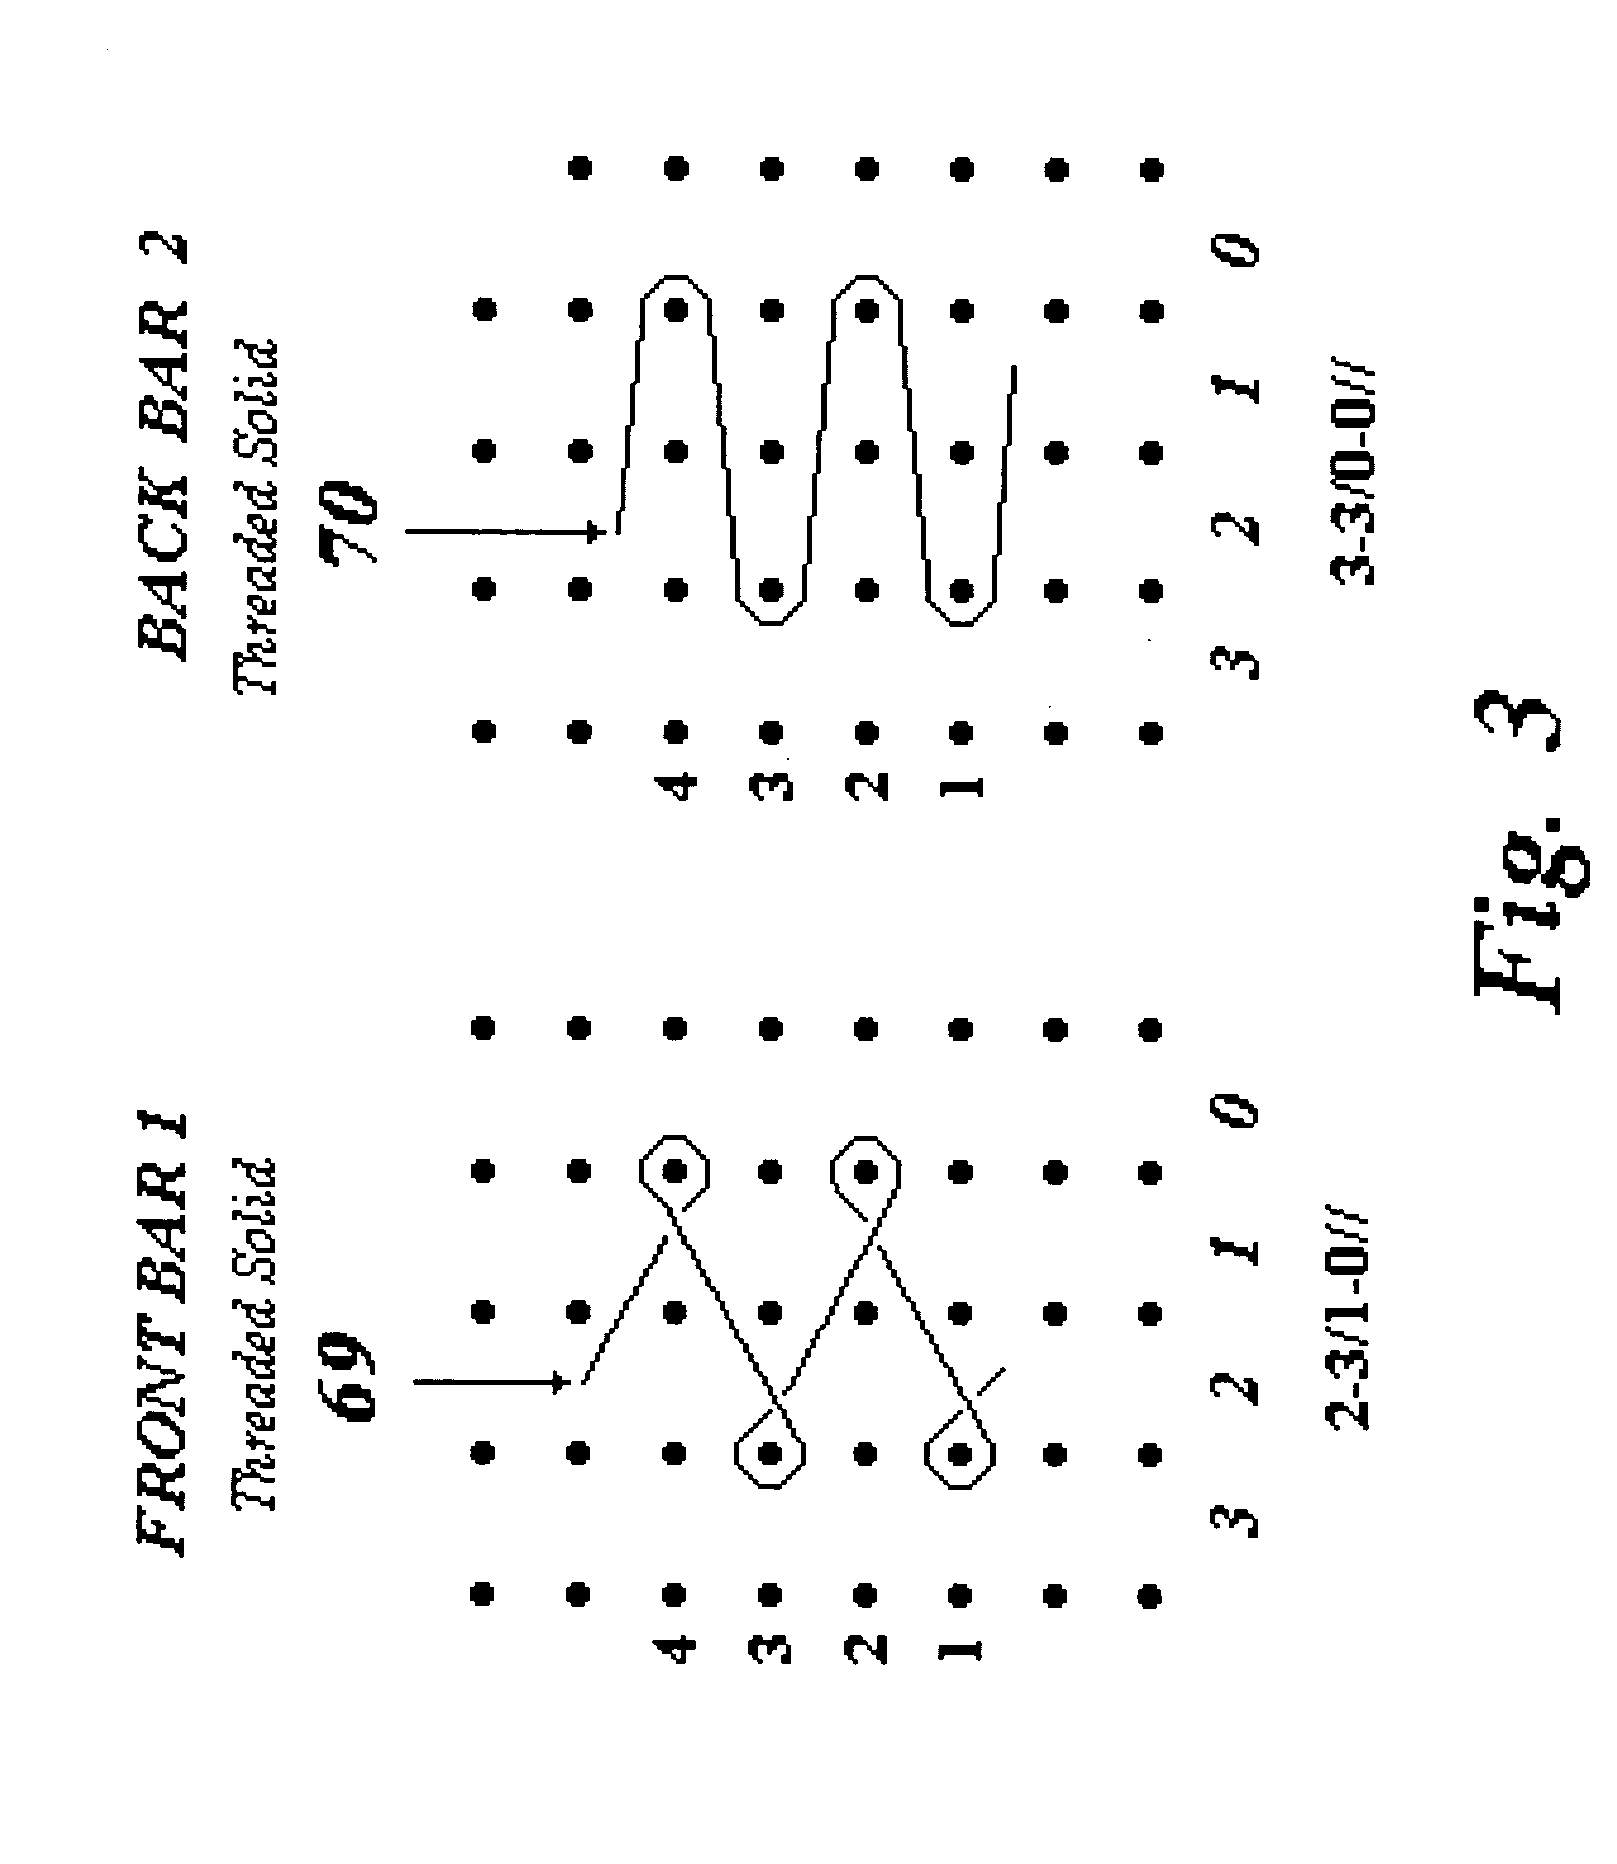 Functional double-faced performance warp knit fabric, method of manufacturing, and products made there from